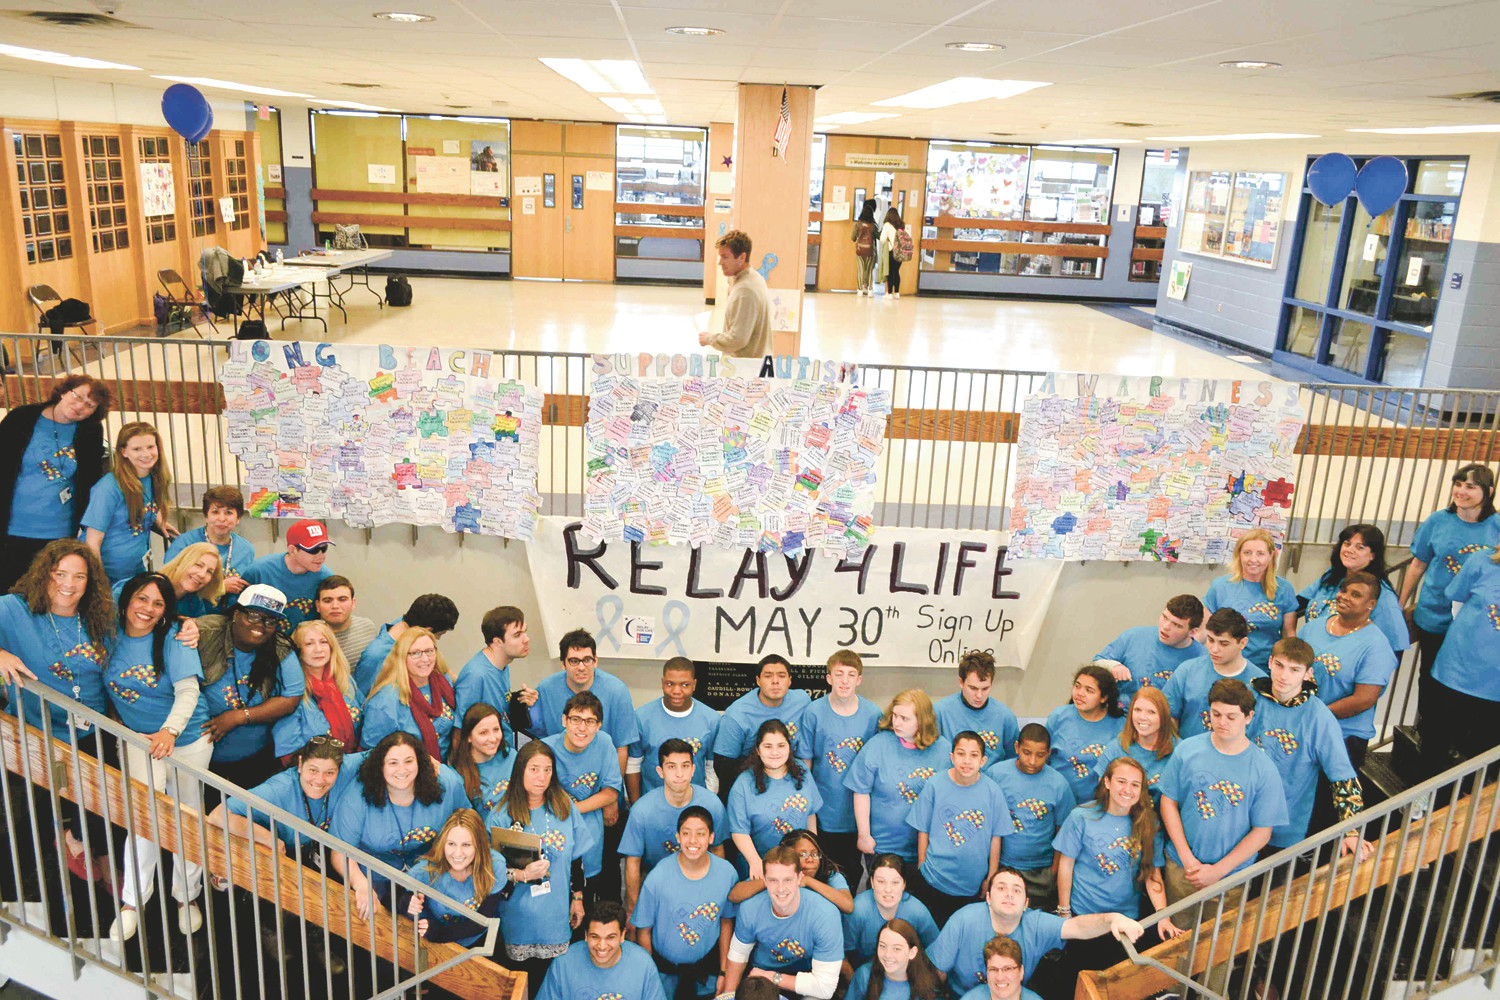 Courtesy Long Beach School District
Students from the Best Pals organization and Life Skills program gathered with staff members in the commons area of Long Beach High School, where a puzzle banner representing Autism Awareness Month hung in April.